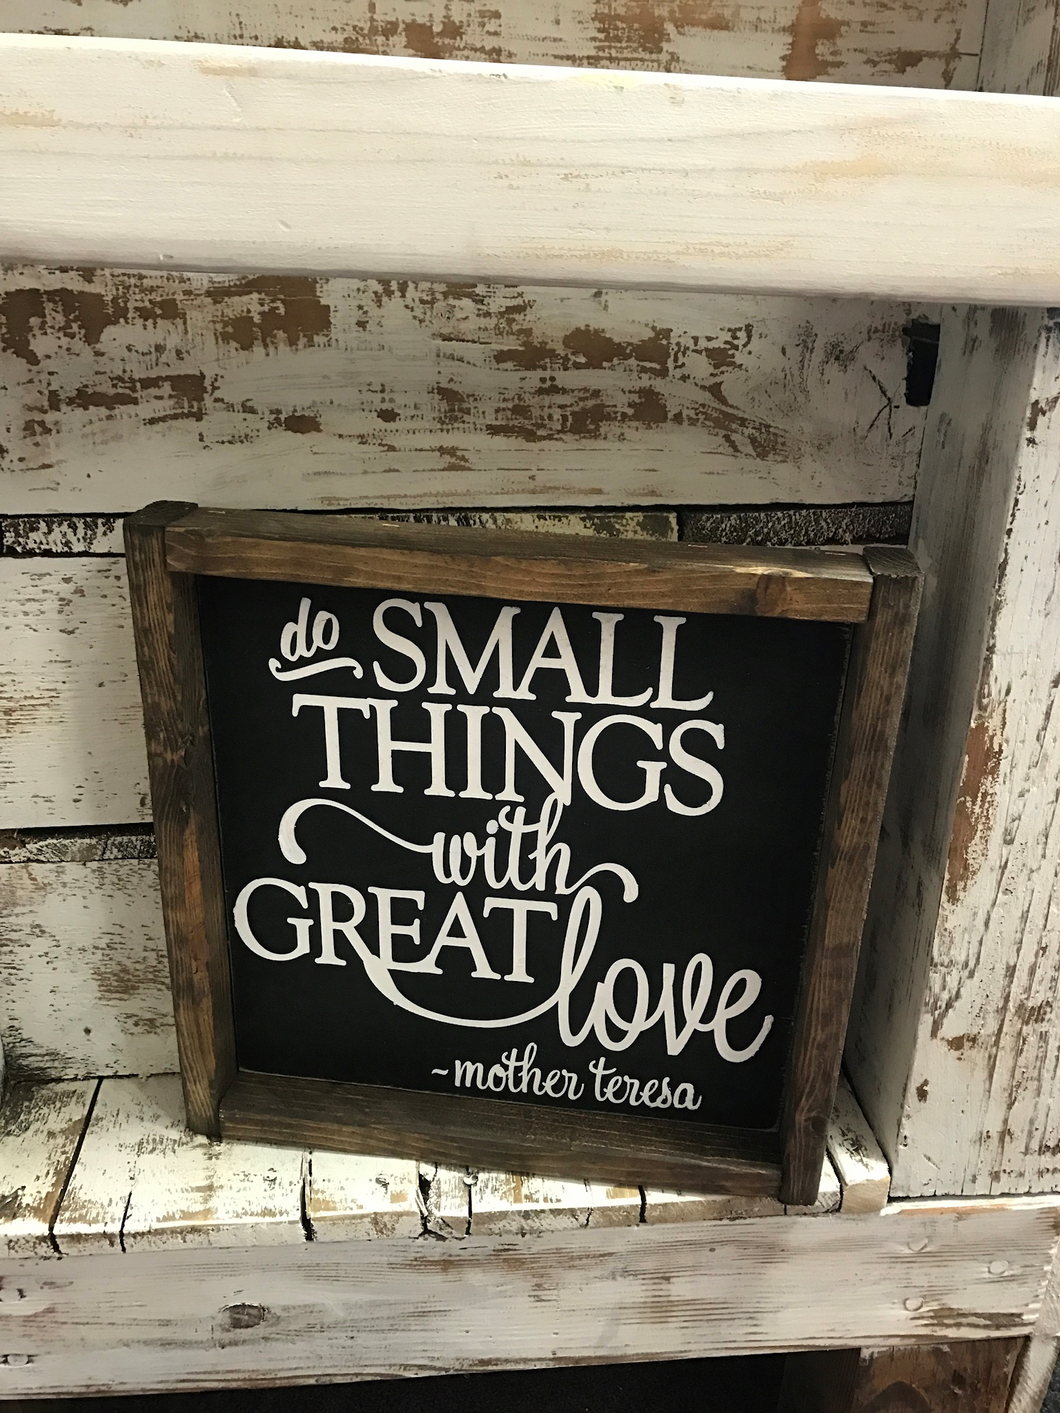 Do Small Things with Great Love - Mother Teresa